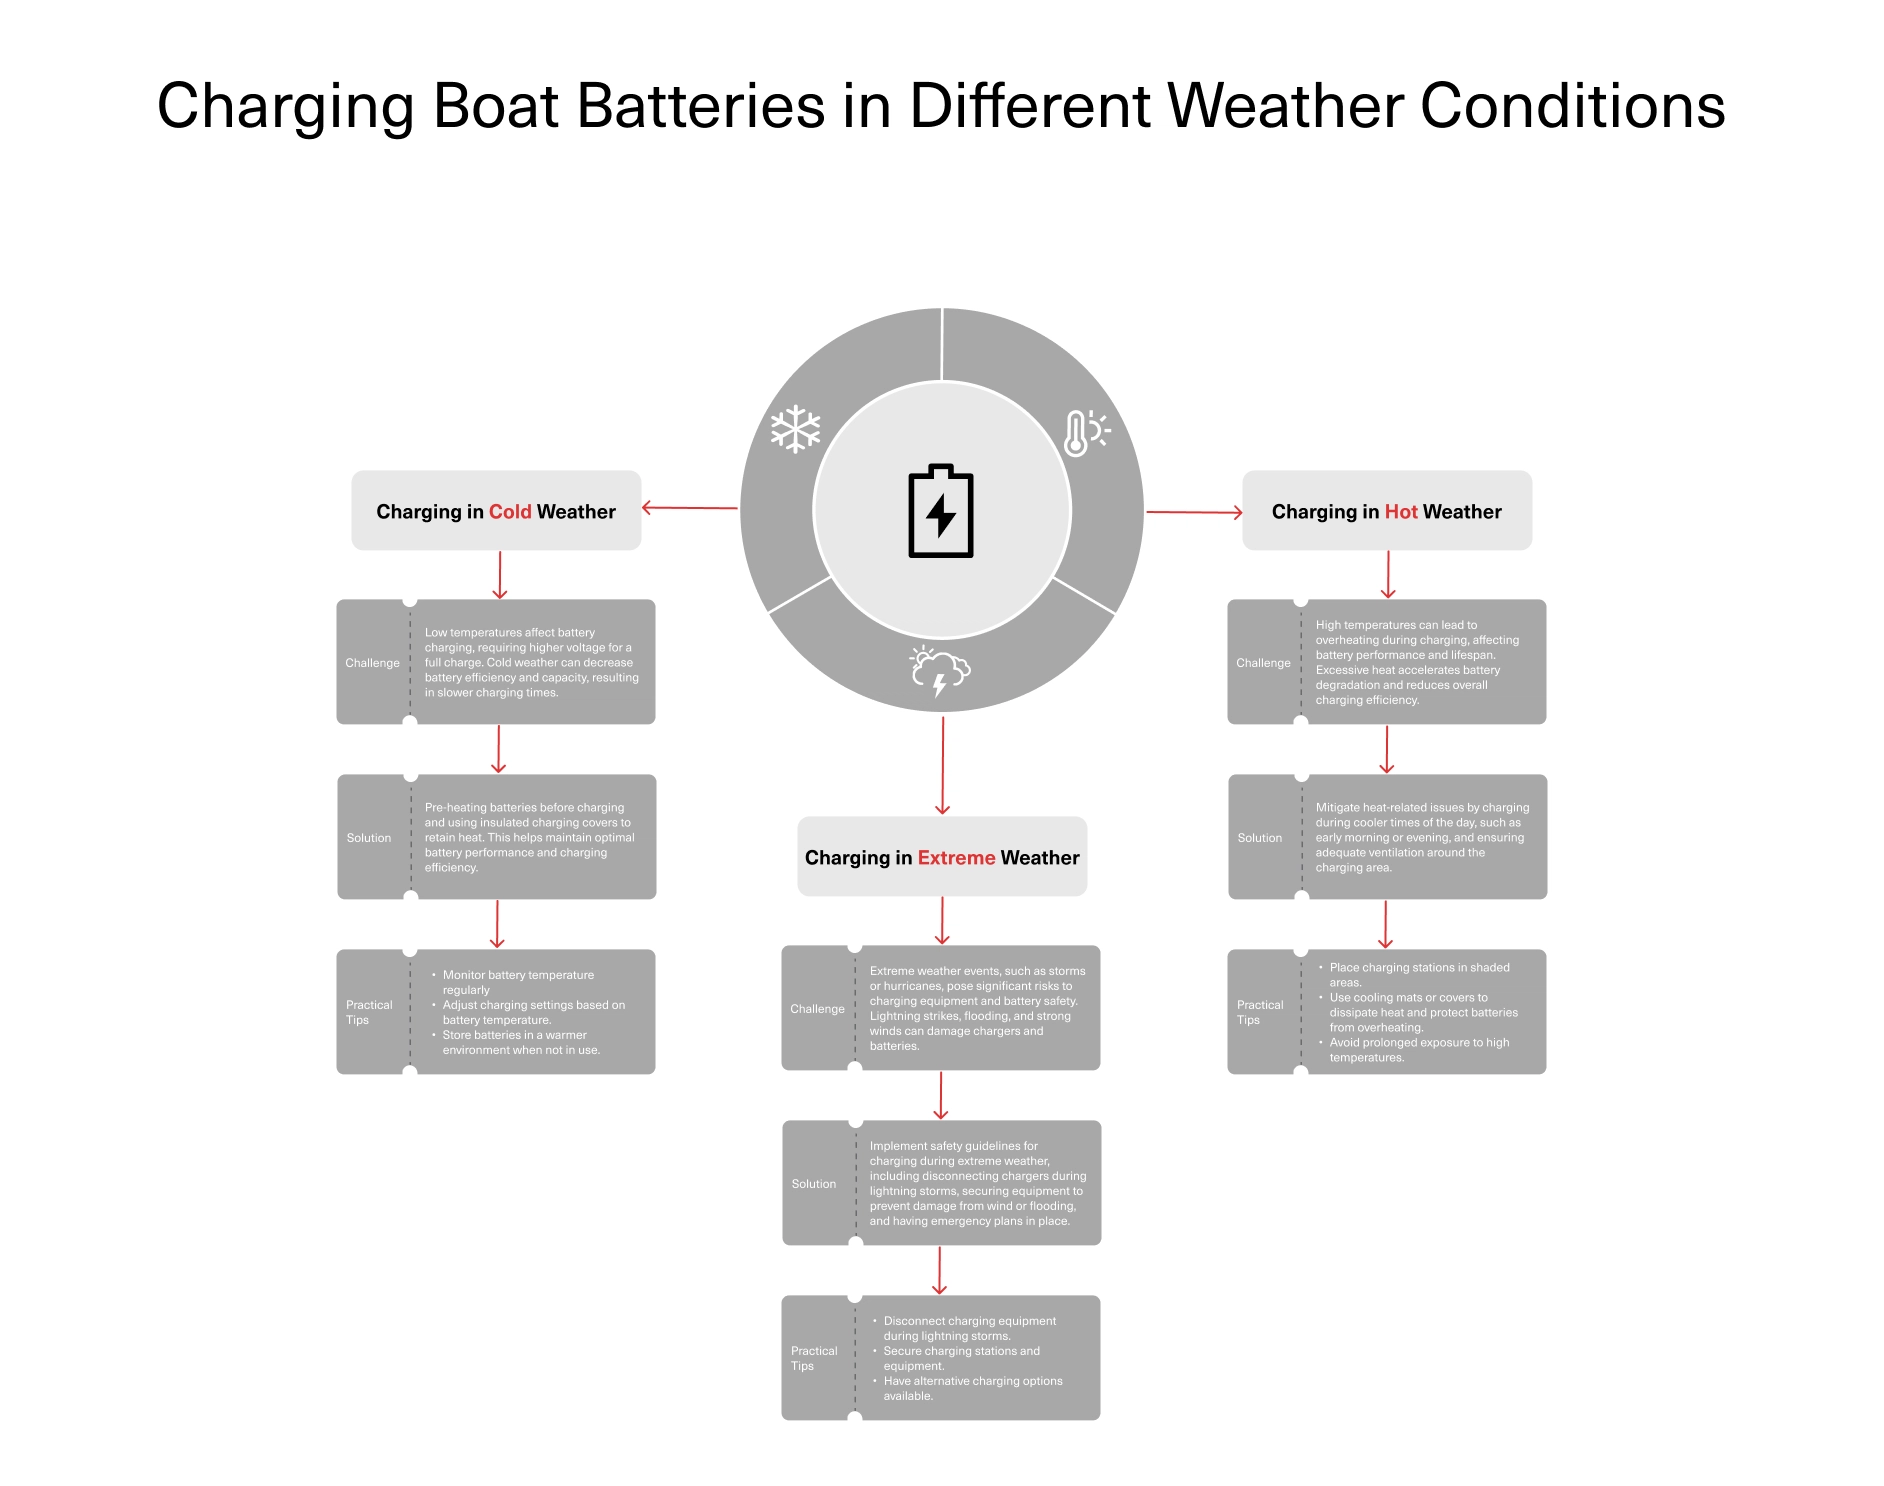 Charging Boat Betteries in Cold Hot and Extreme Weather Conditions